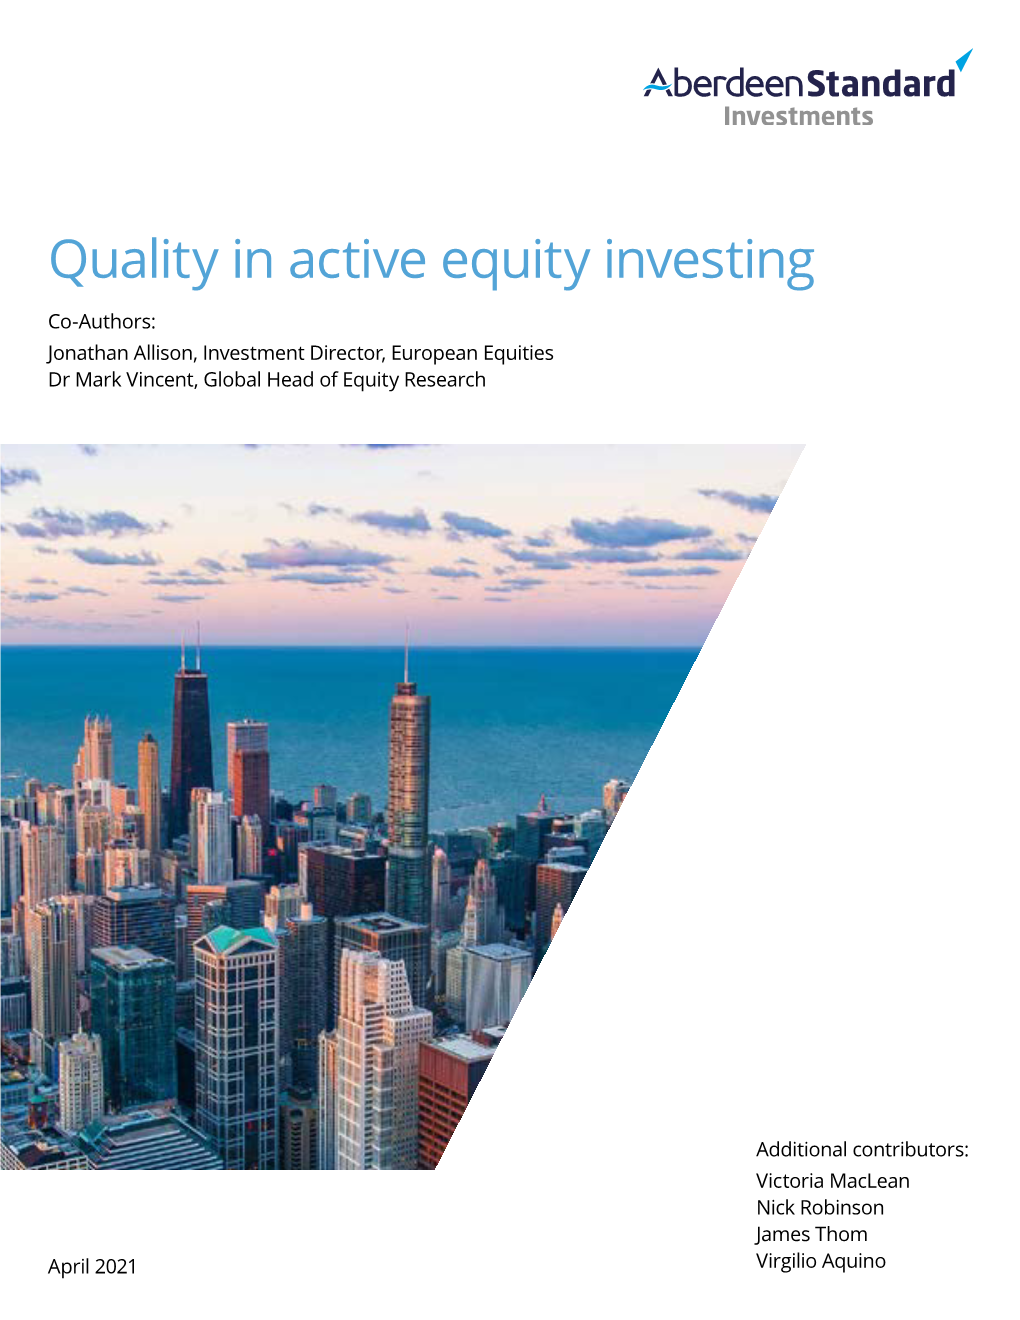 Quality in Active Equity Investing